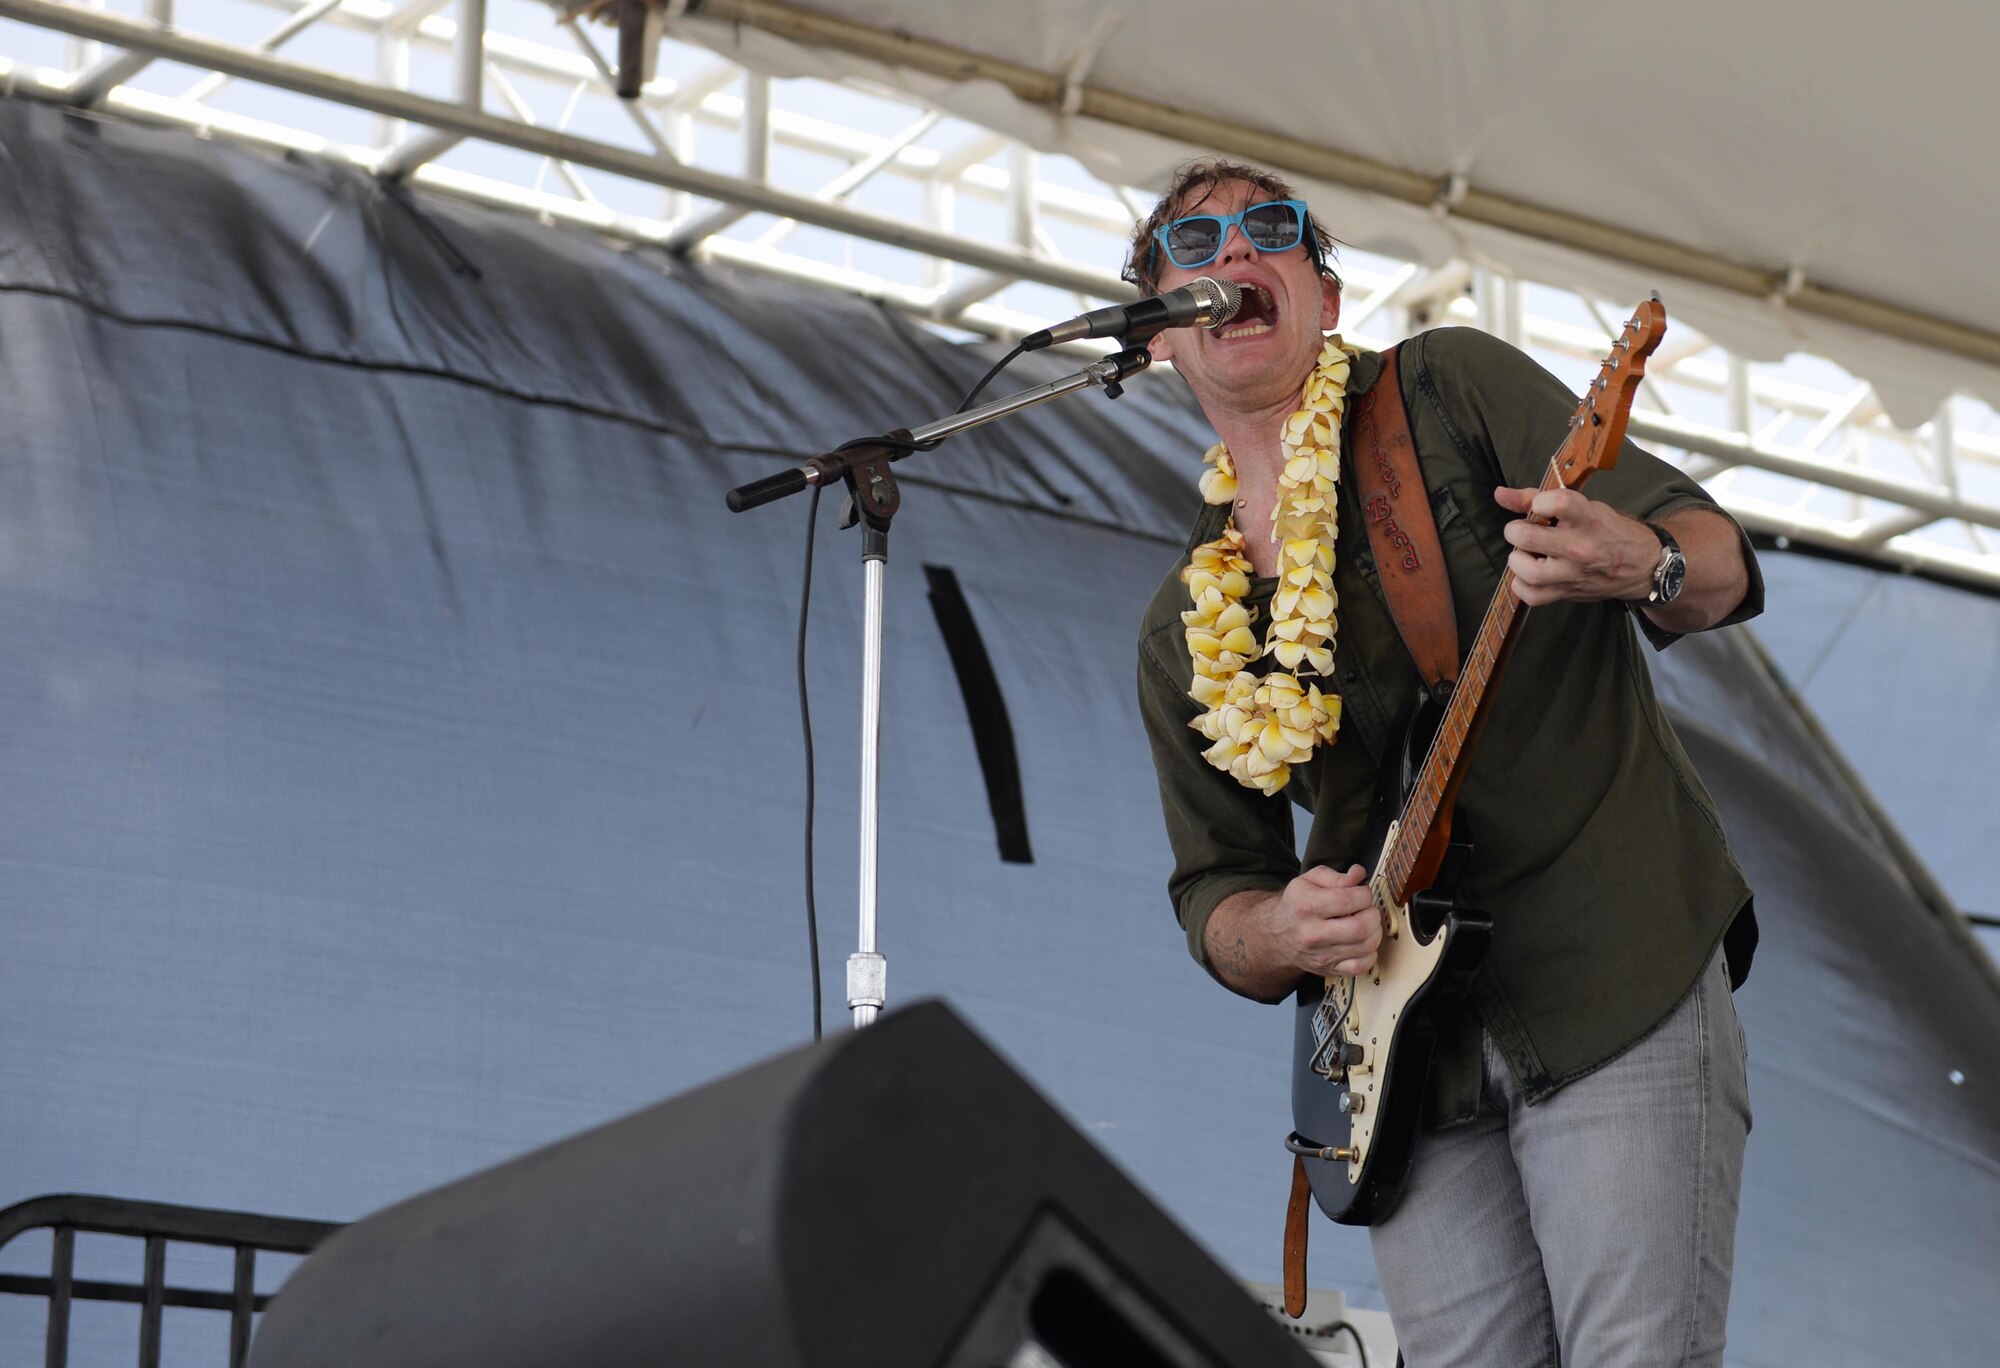 Chris Walker plays for attendees of the 2016 Pacific Air Partners Open House Feb. 20 at Andersen Air Force Base, Guam. In addition to the Chris Walker Band, attendees of the open house were able to experience musical acts from Full Sprectrum and Rumblefish. (U.S. Air Force photo/Airman 1st Class Jacob Skovo)